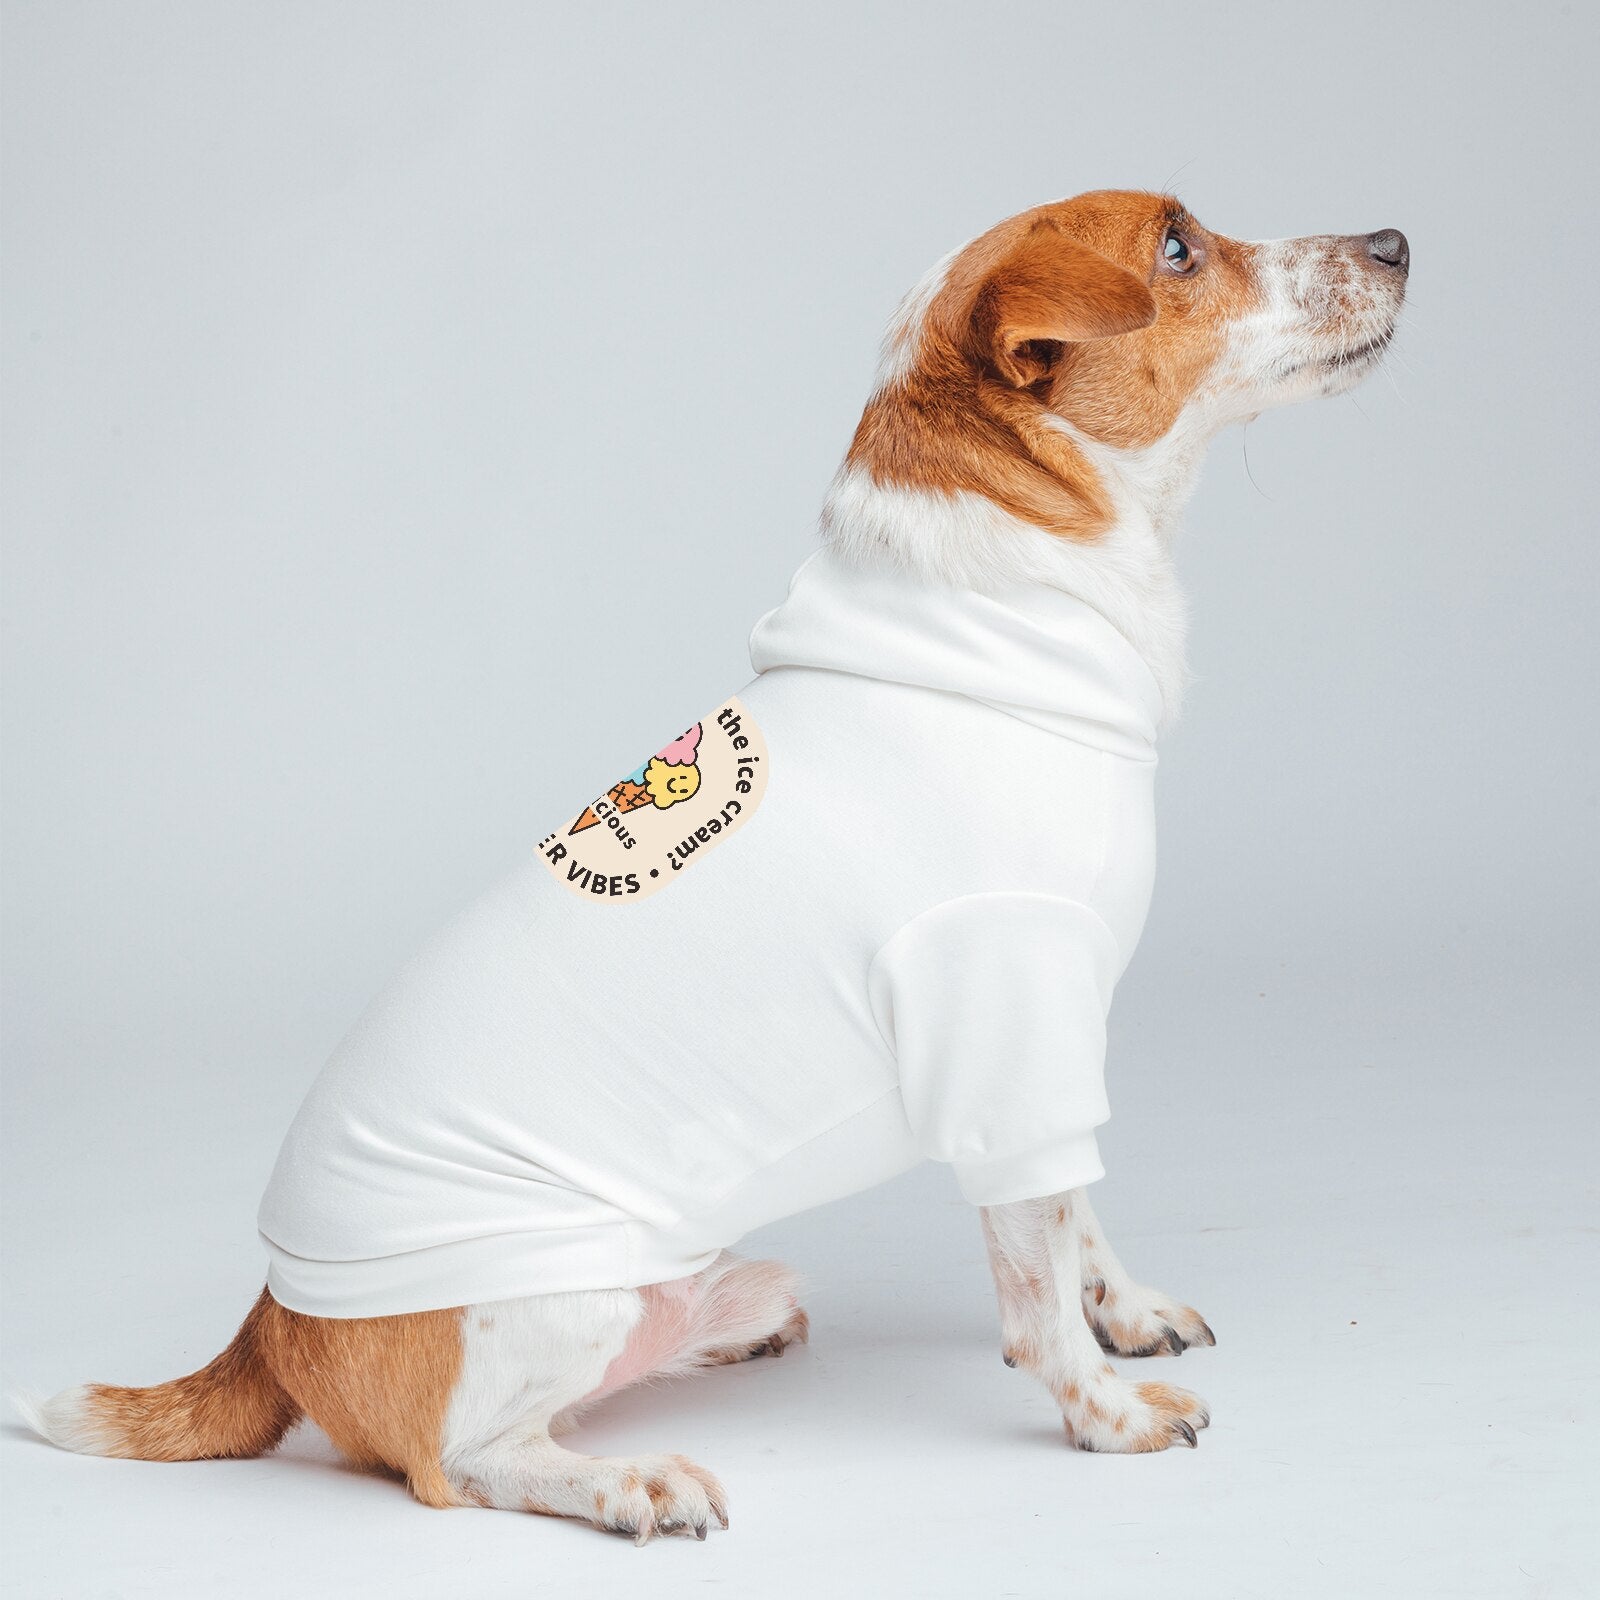 Dog Clothes Ice Cream Pattern Printed Hoodies for All Sizes Pet, Cute and Classic in Cotton Fabric, Stripe White Red